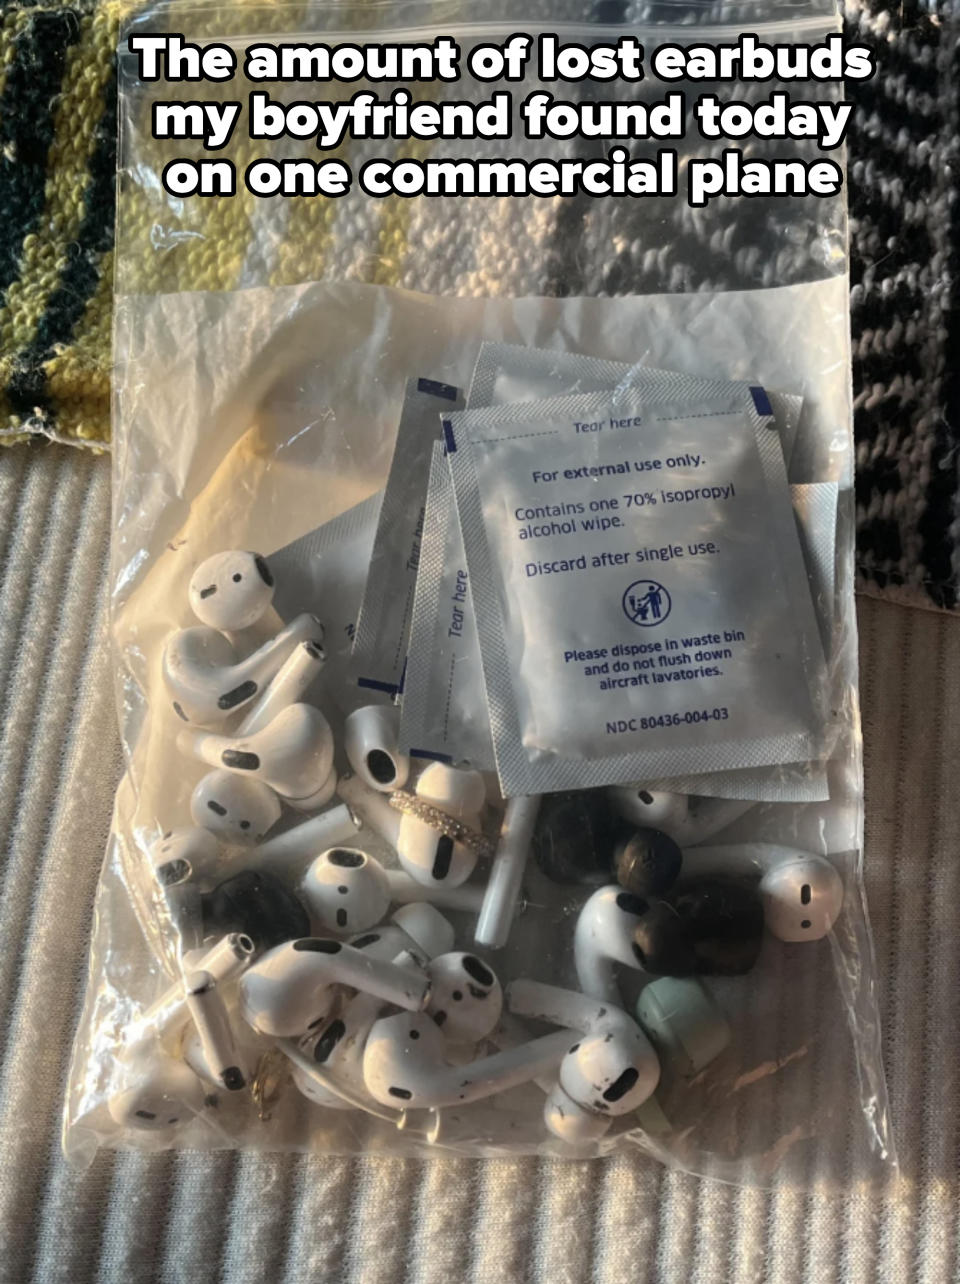 A clear plastic bag filled with several pairs of used earbud headphones. 